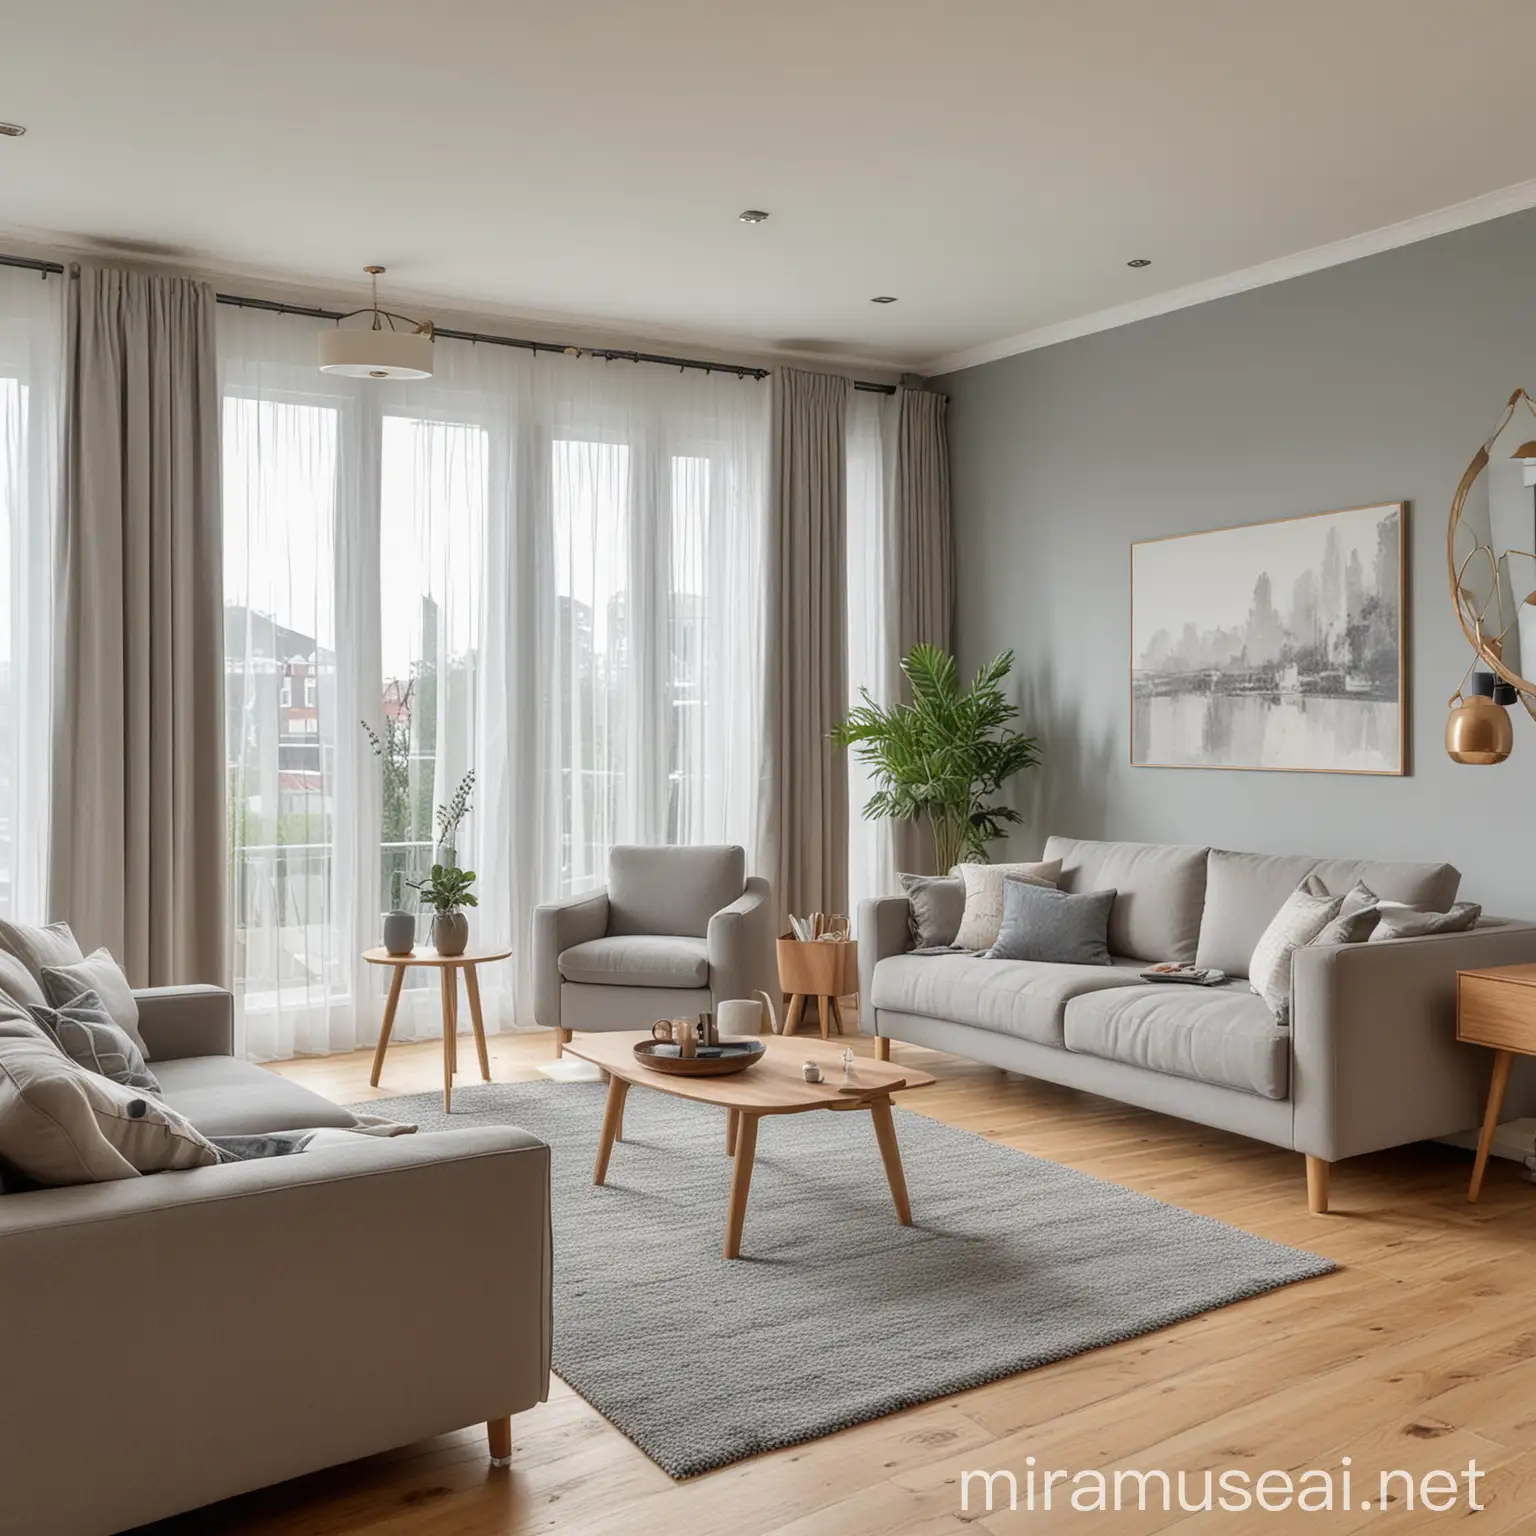 Bright, airy and modern living room with sideboard and TV, big sofa and rug, also an armchair, a center table and curtains  wooden and grey teamed